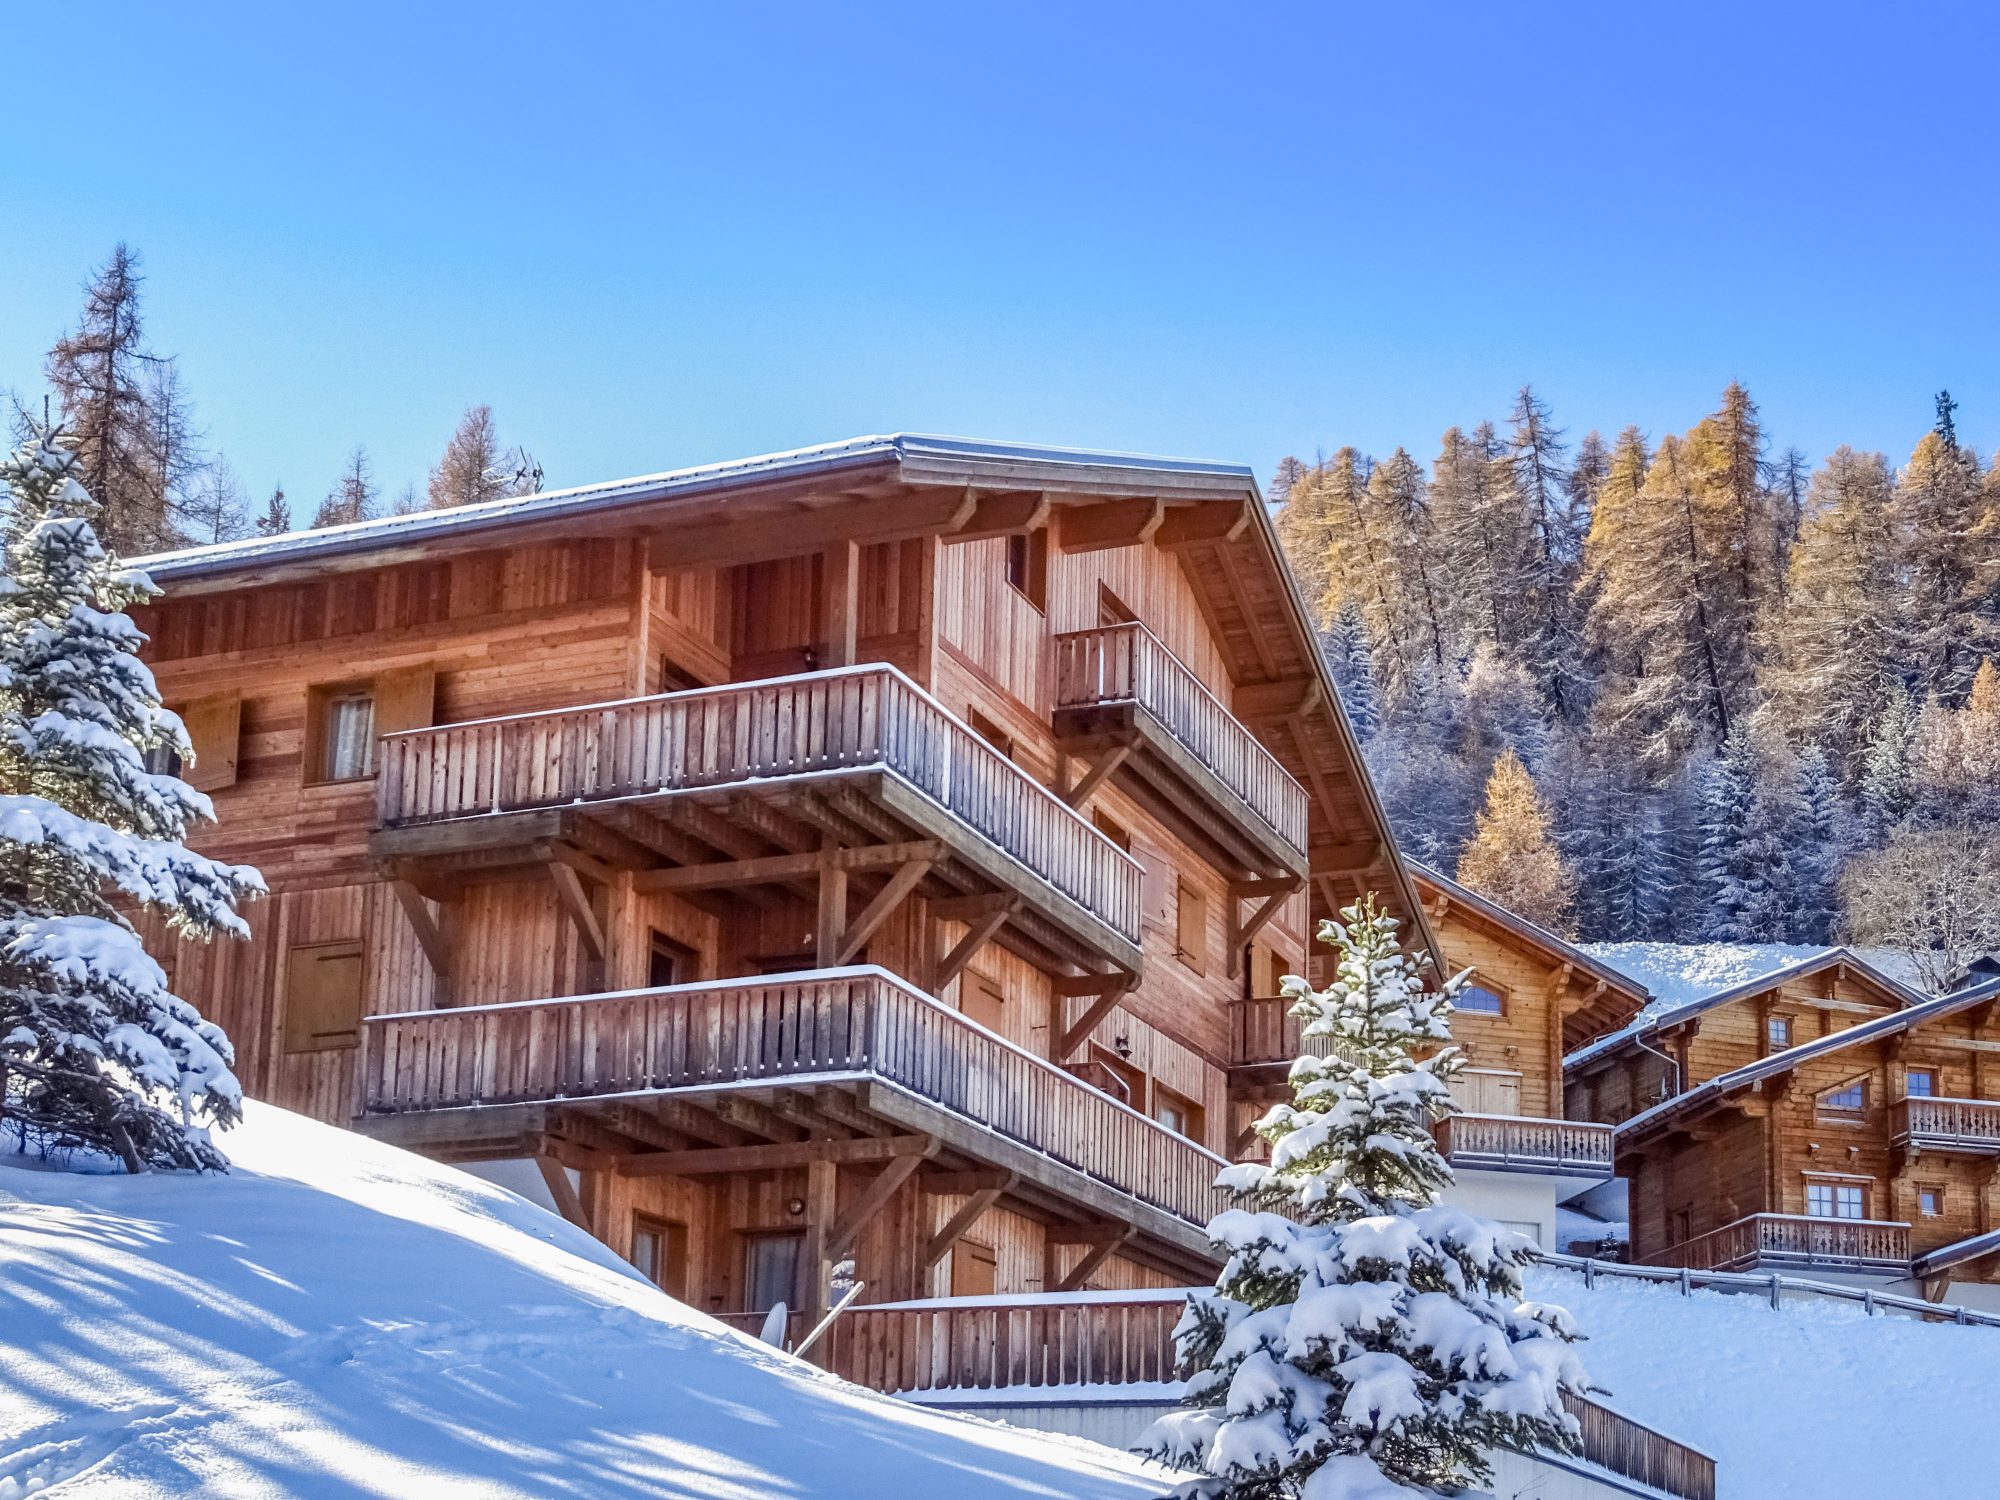 A Guide to Buying Ski Property